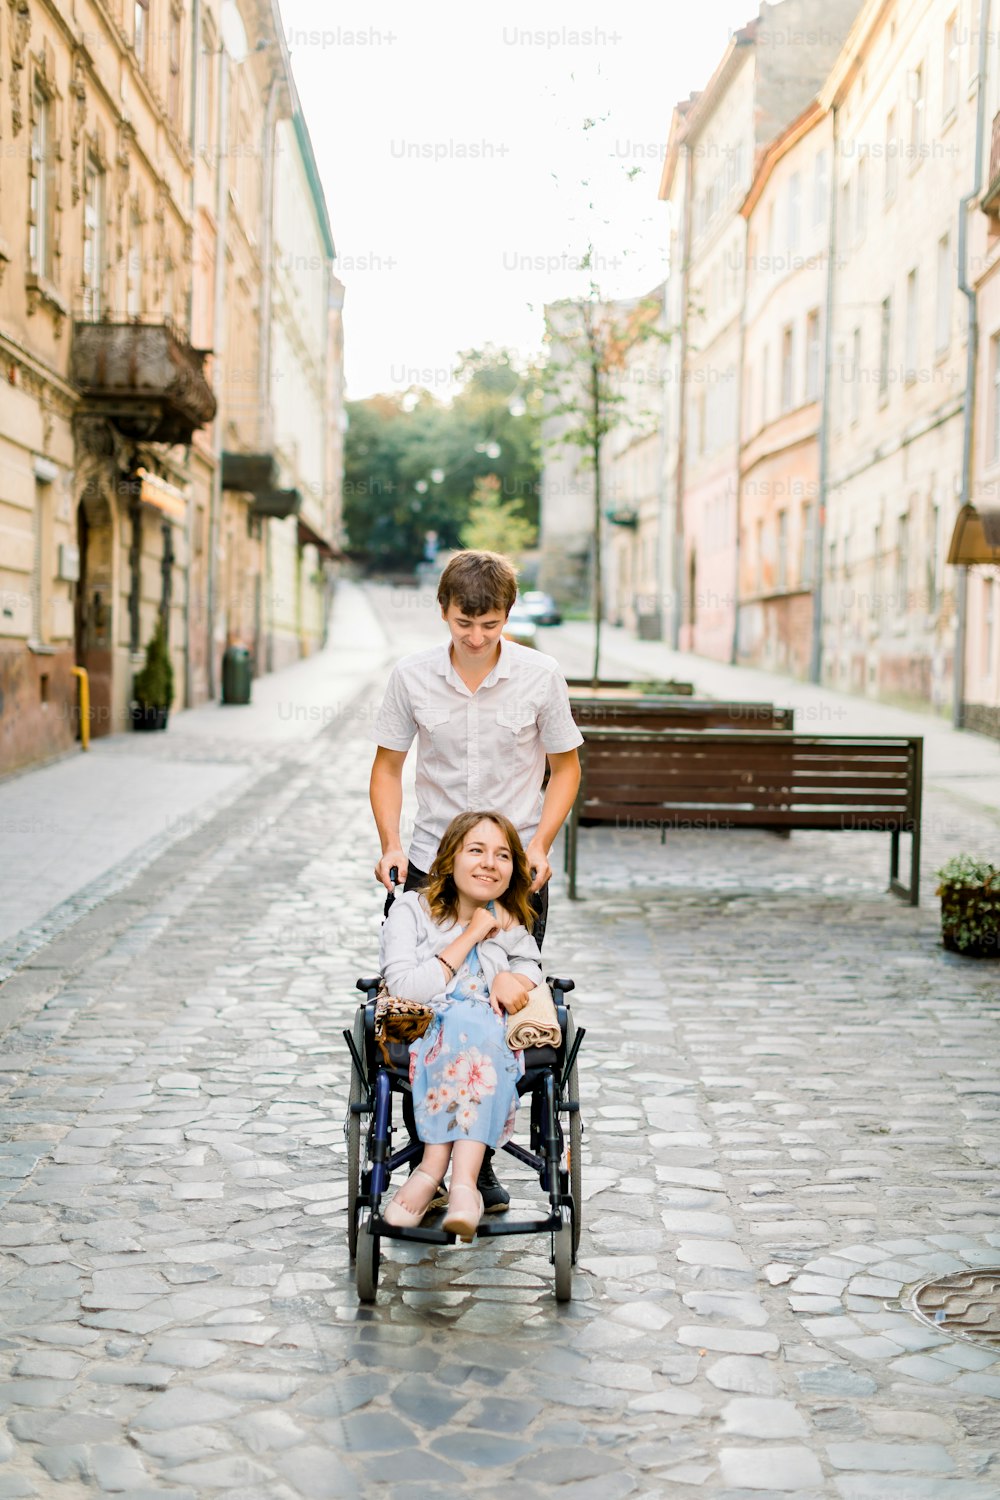 Young Couple In Wheelchair Strolling In The City. Pretty young woman in wheelchair and her boyfriend in the center of old city.